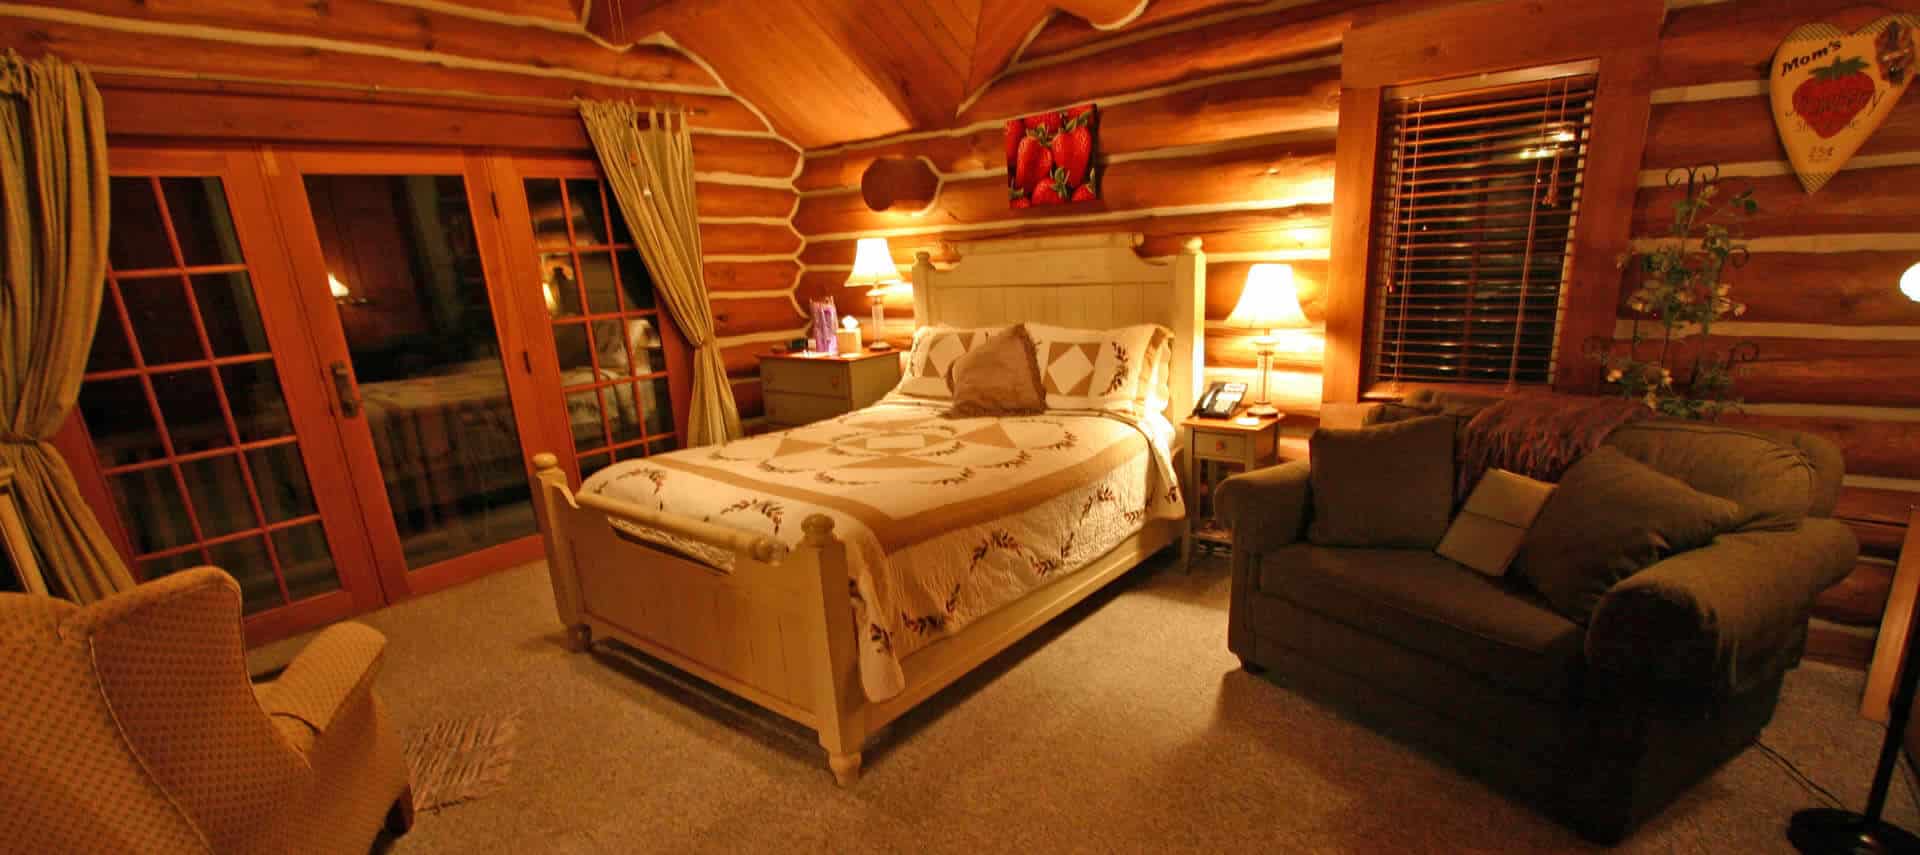 Warm bedroom in a log-cabin setting with a quilt-covered bed, a sofa and wingback chair.